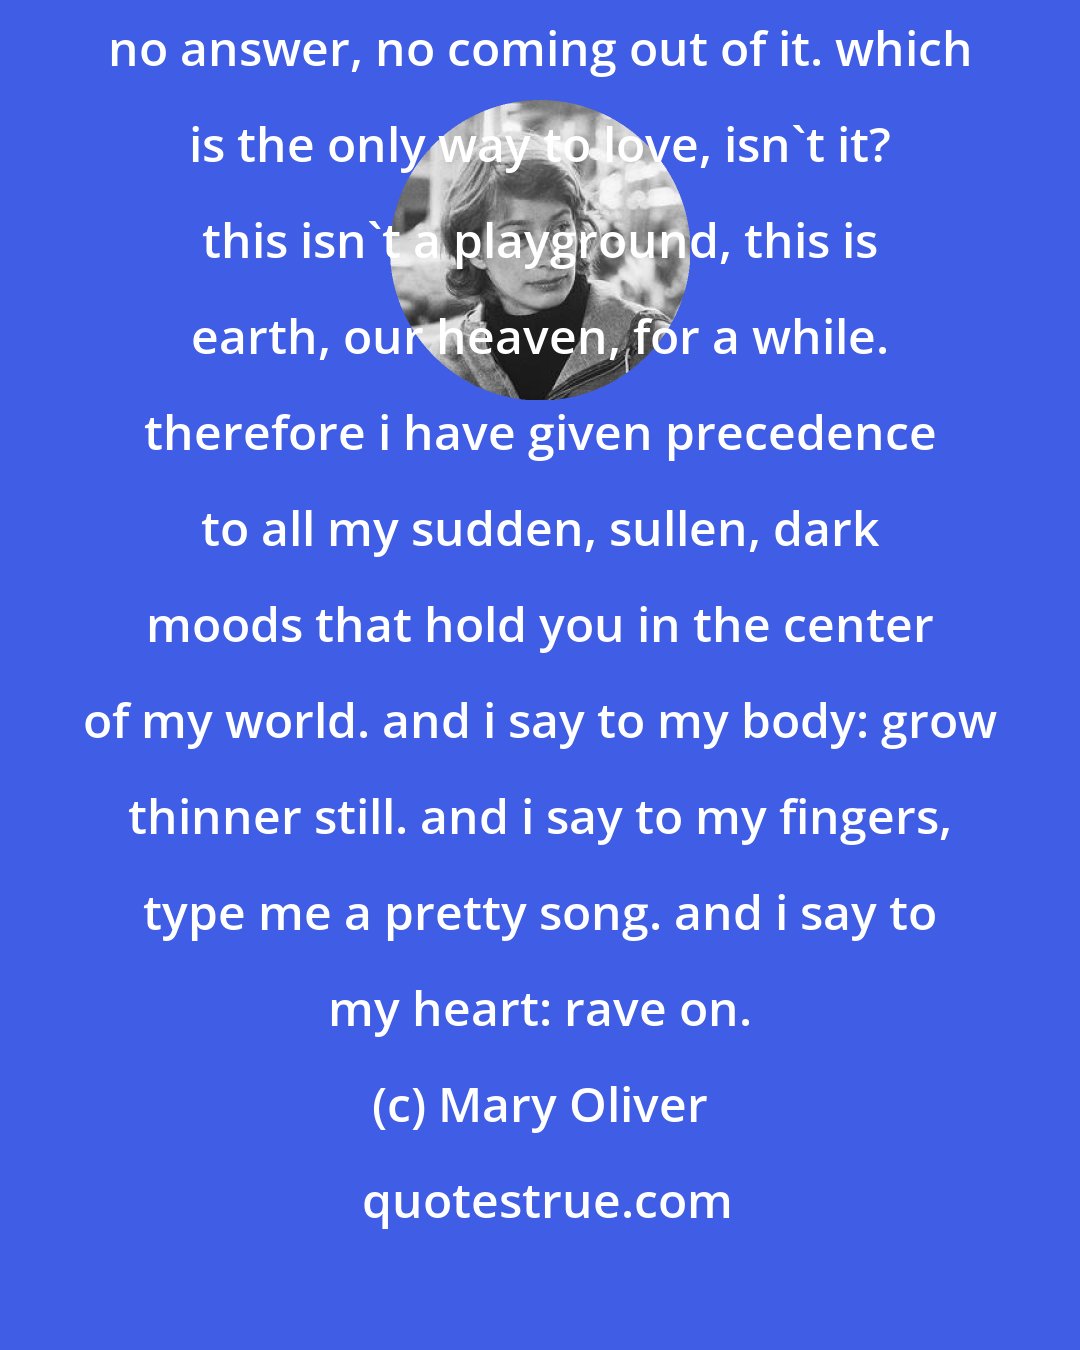 Mary Oliver: from the complications of loving you i think there is no end or return. no answer, no coming out of it. which is the only way to love, isn't it? this isn't a playground, this is earth, our heaven, for a while. therefore i have given precedence to all my sudden, sullen, dark moods that hold you in the center of my world. and i say to my body: grow thinner still. and i say to my fingers, type me a pretty song. and i say to my heart: rave on.